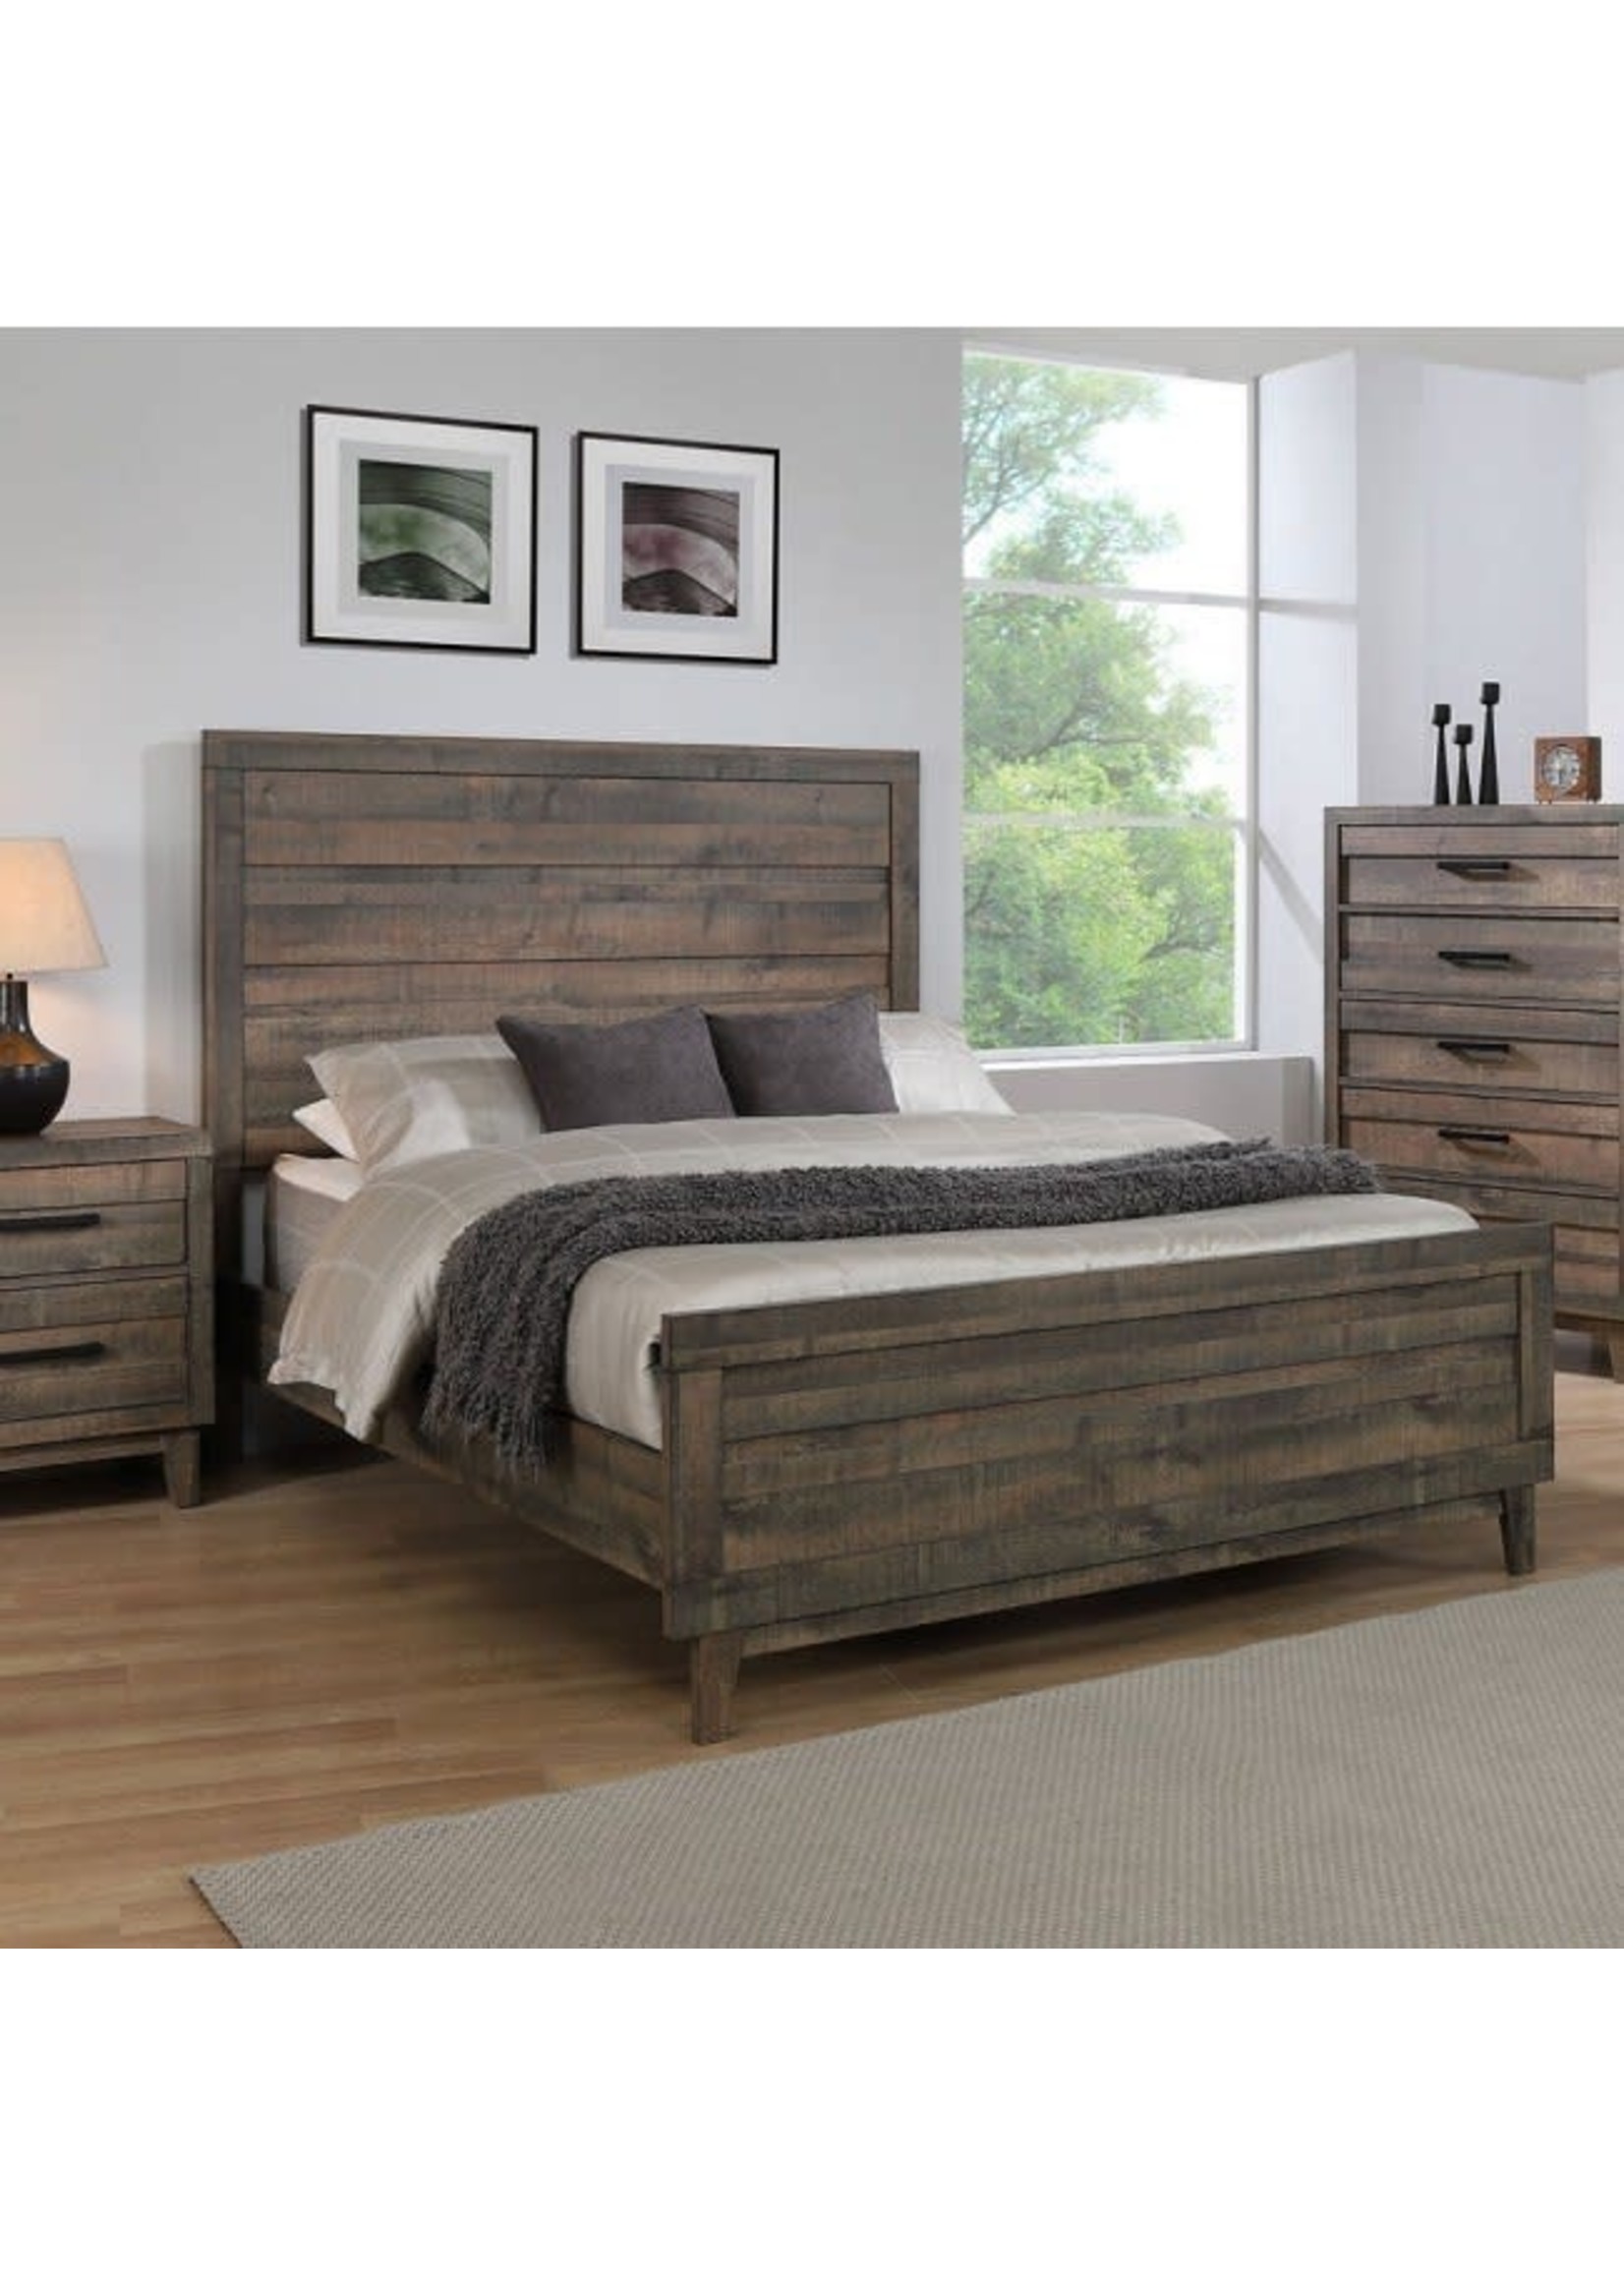 CROWNMARK B8280-Q-H/F/R QUEEN BED TACOMA BROWN